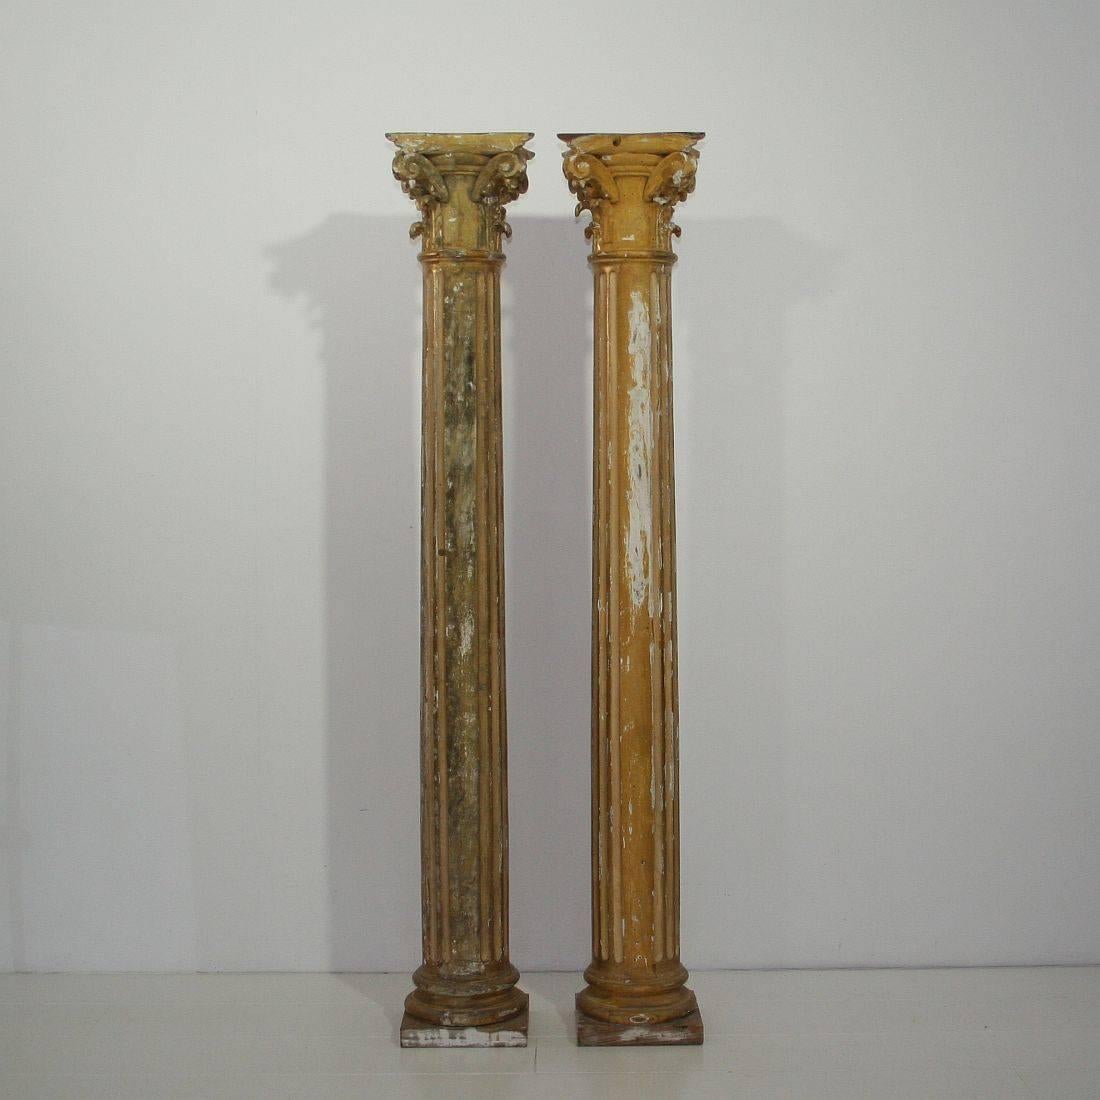 Carved Early 19th Century Italian Neoclassical Giltwood Columns